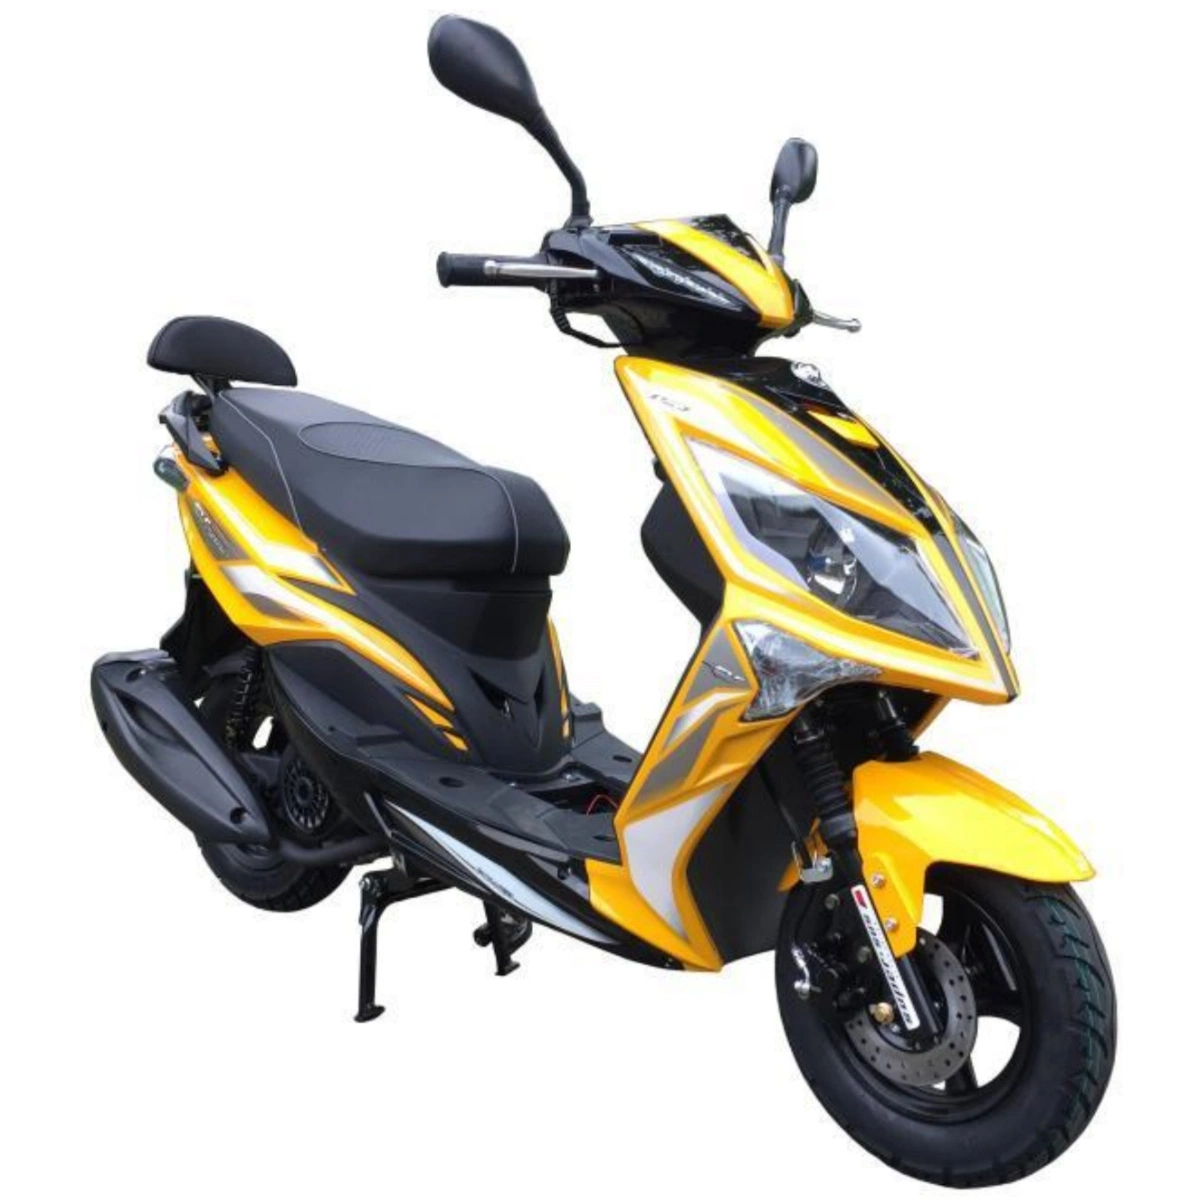 Superior Quality Gasoline Scooter Adult Moped Motorcycle Gasoline Dirt Bike